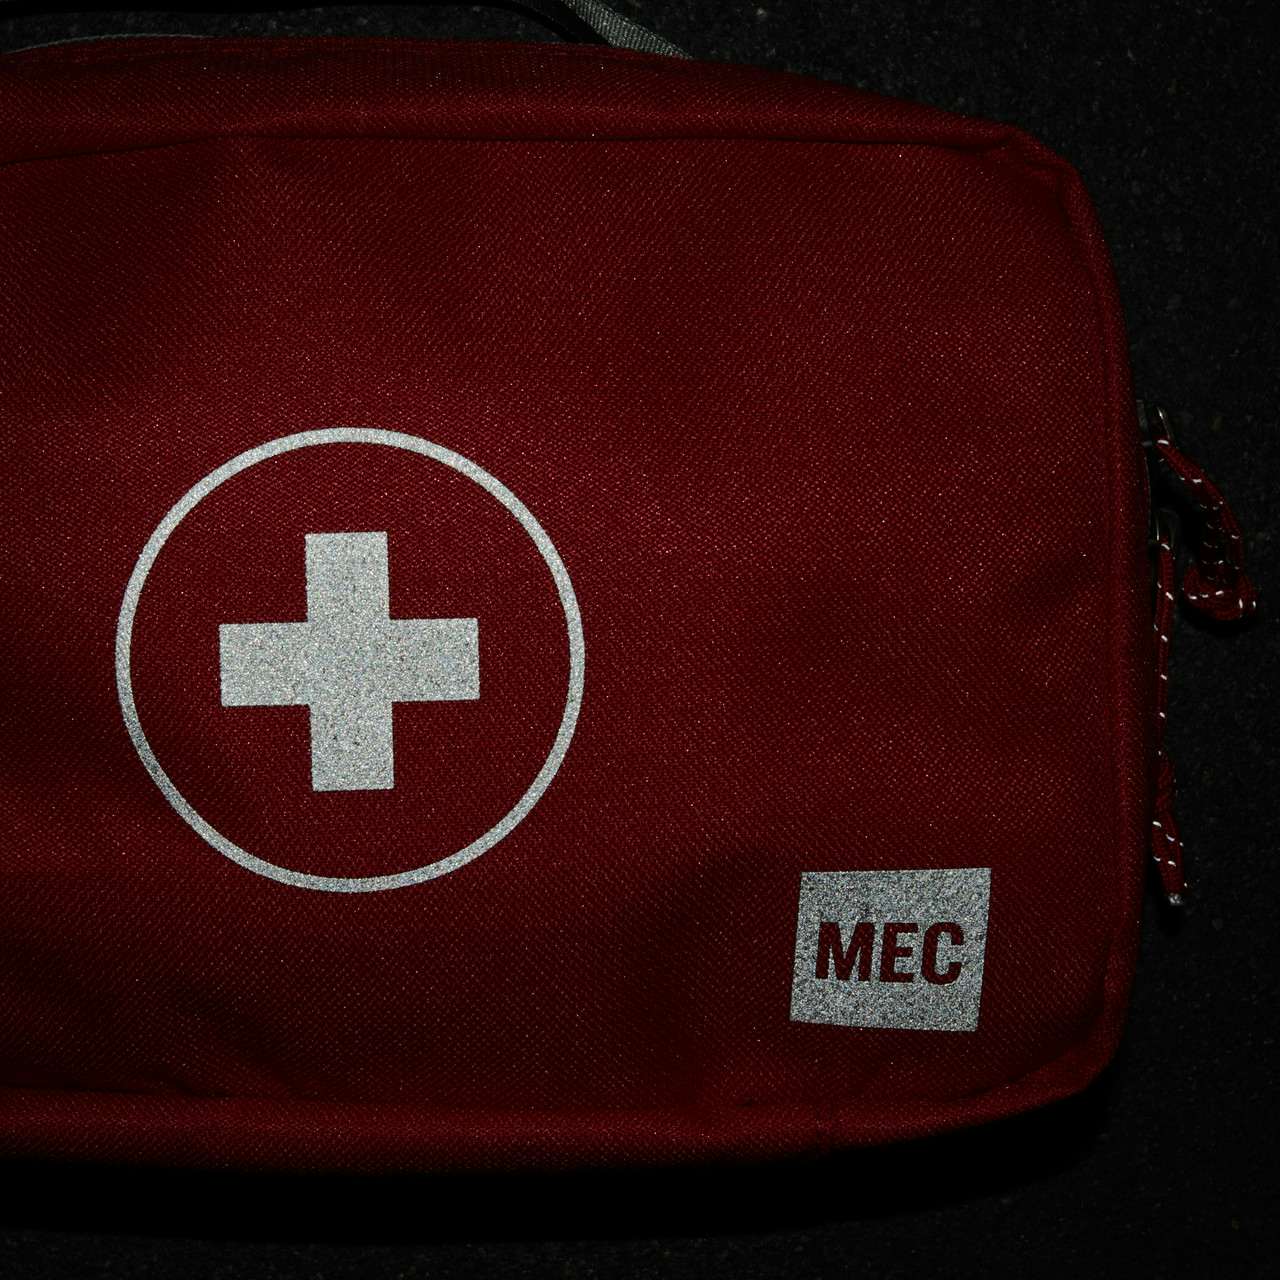 First Aid Bag Safety Red